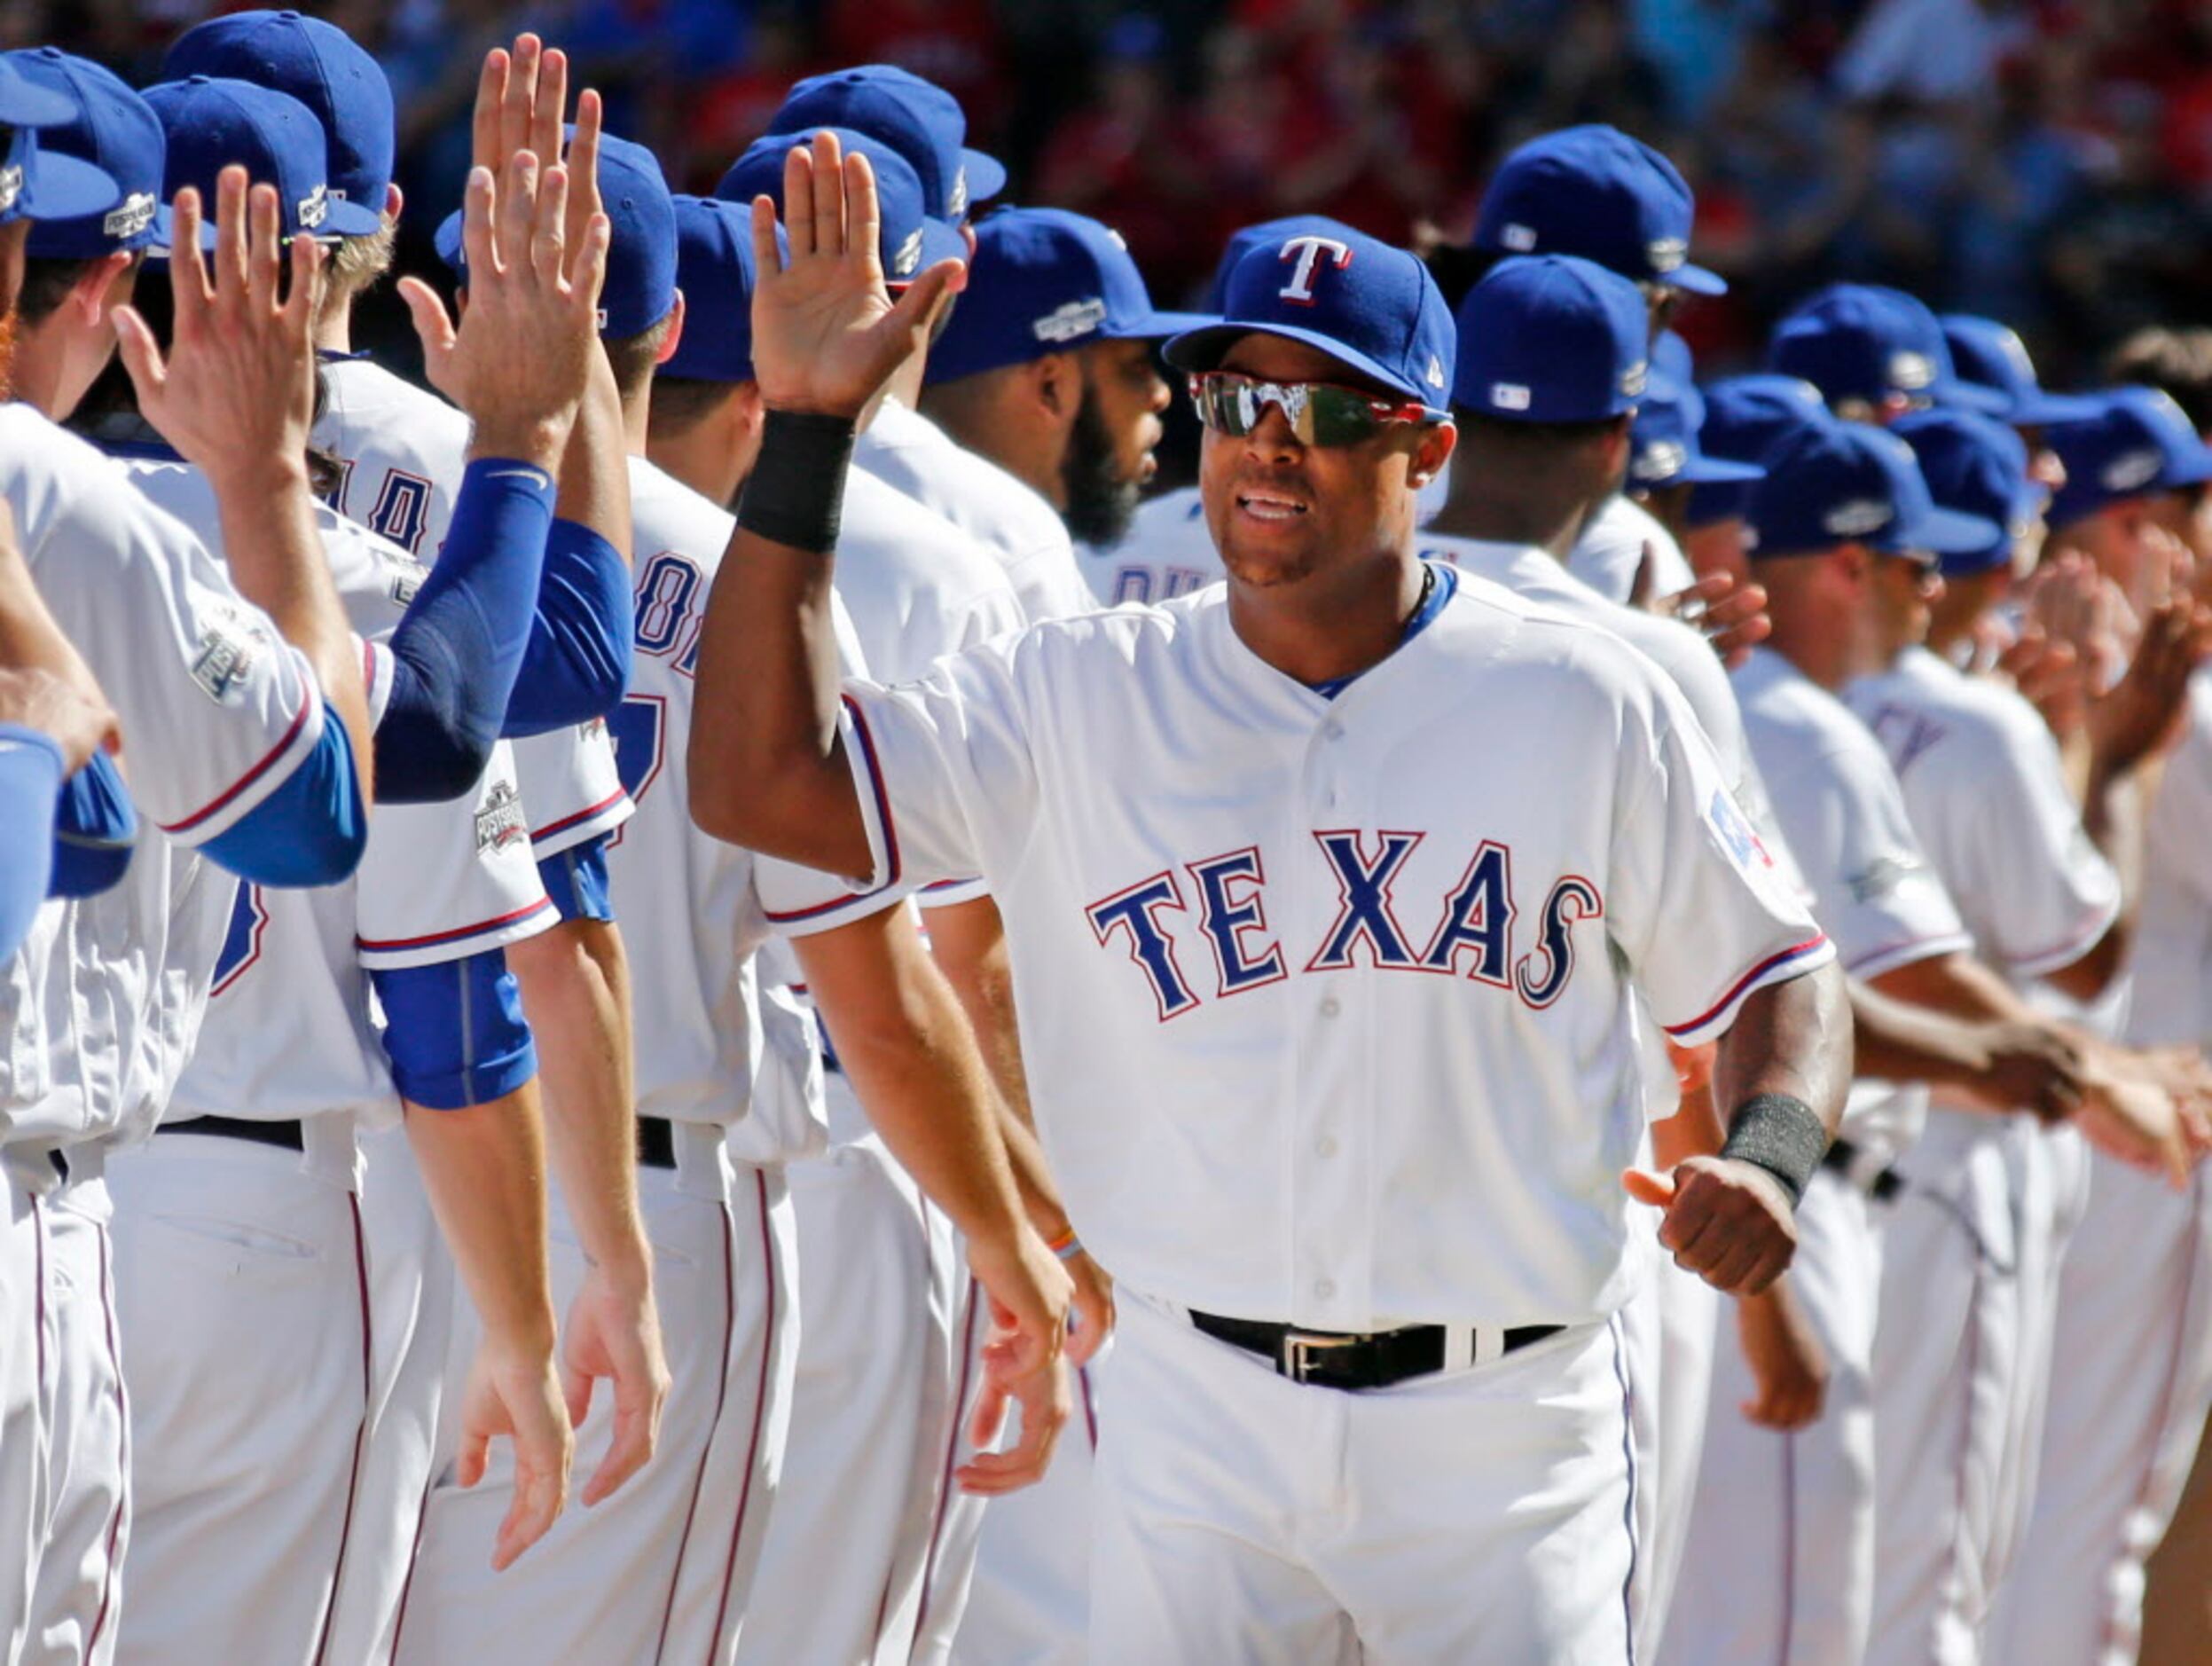 So now that Pudge is in, who is the next Ranger on deck for the Hall of  Fame?